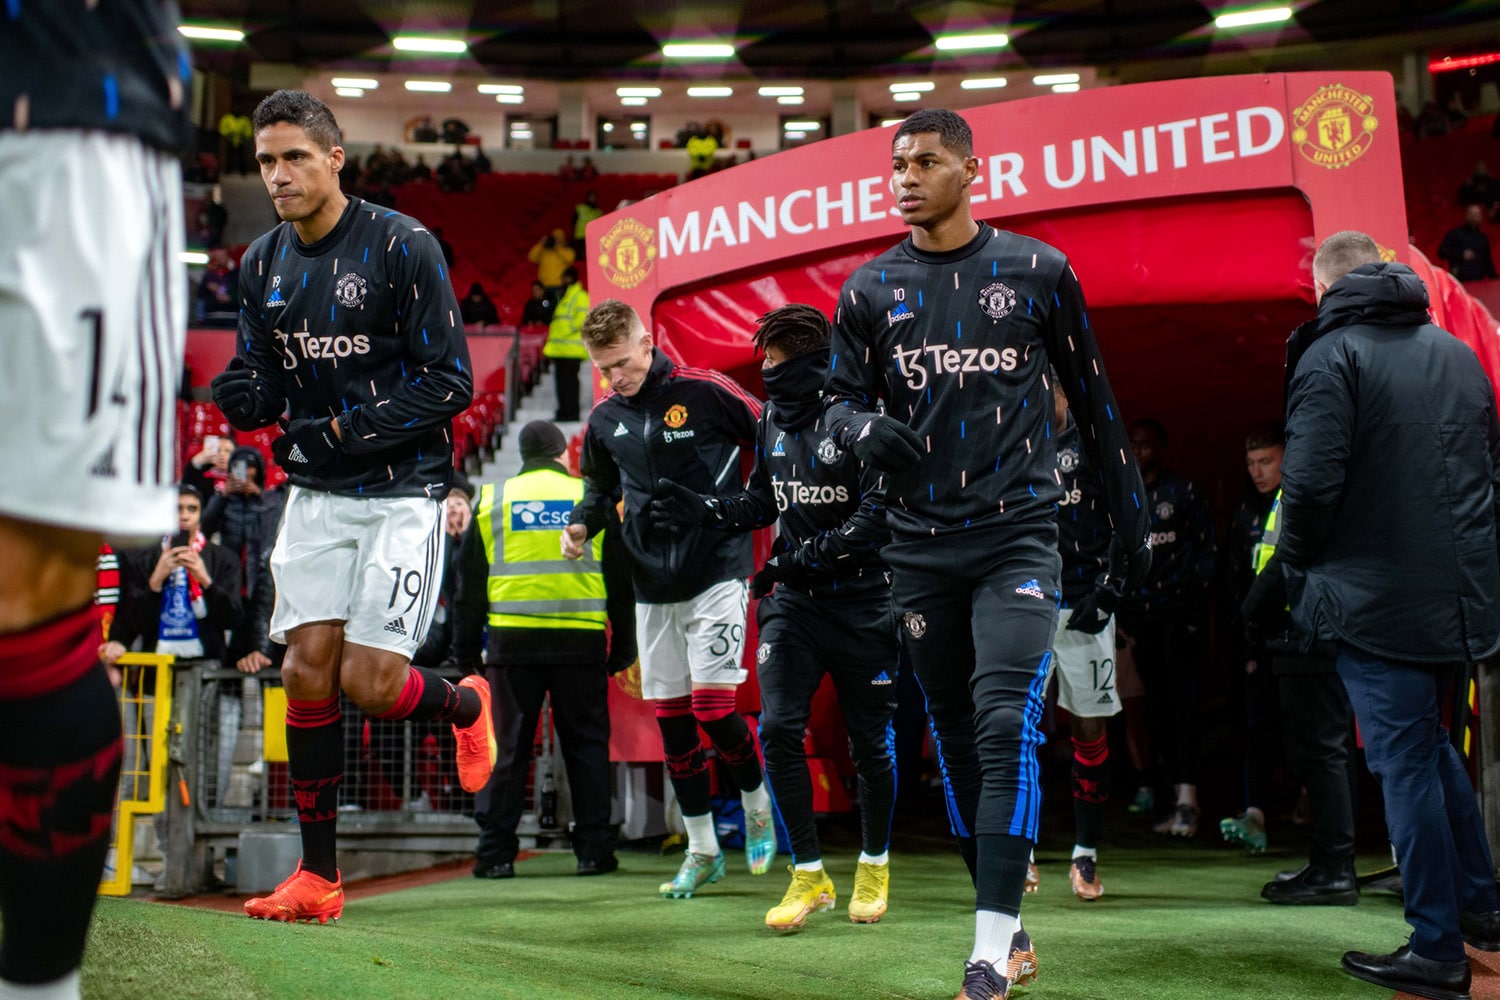 Manchester United players enter the pitch from the tunnel before a match.